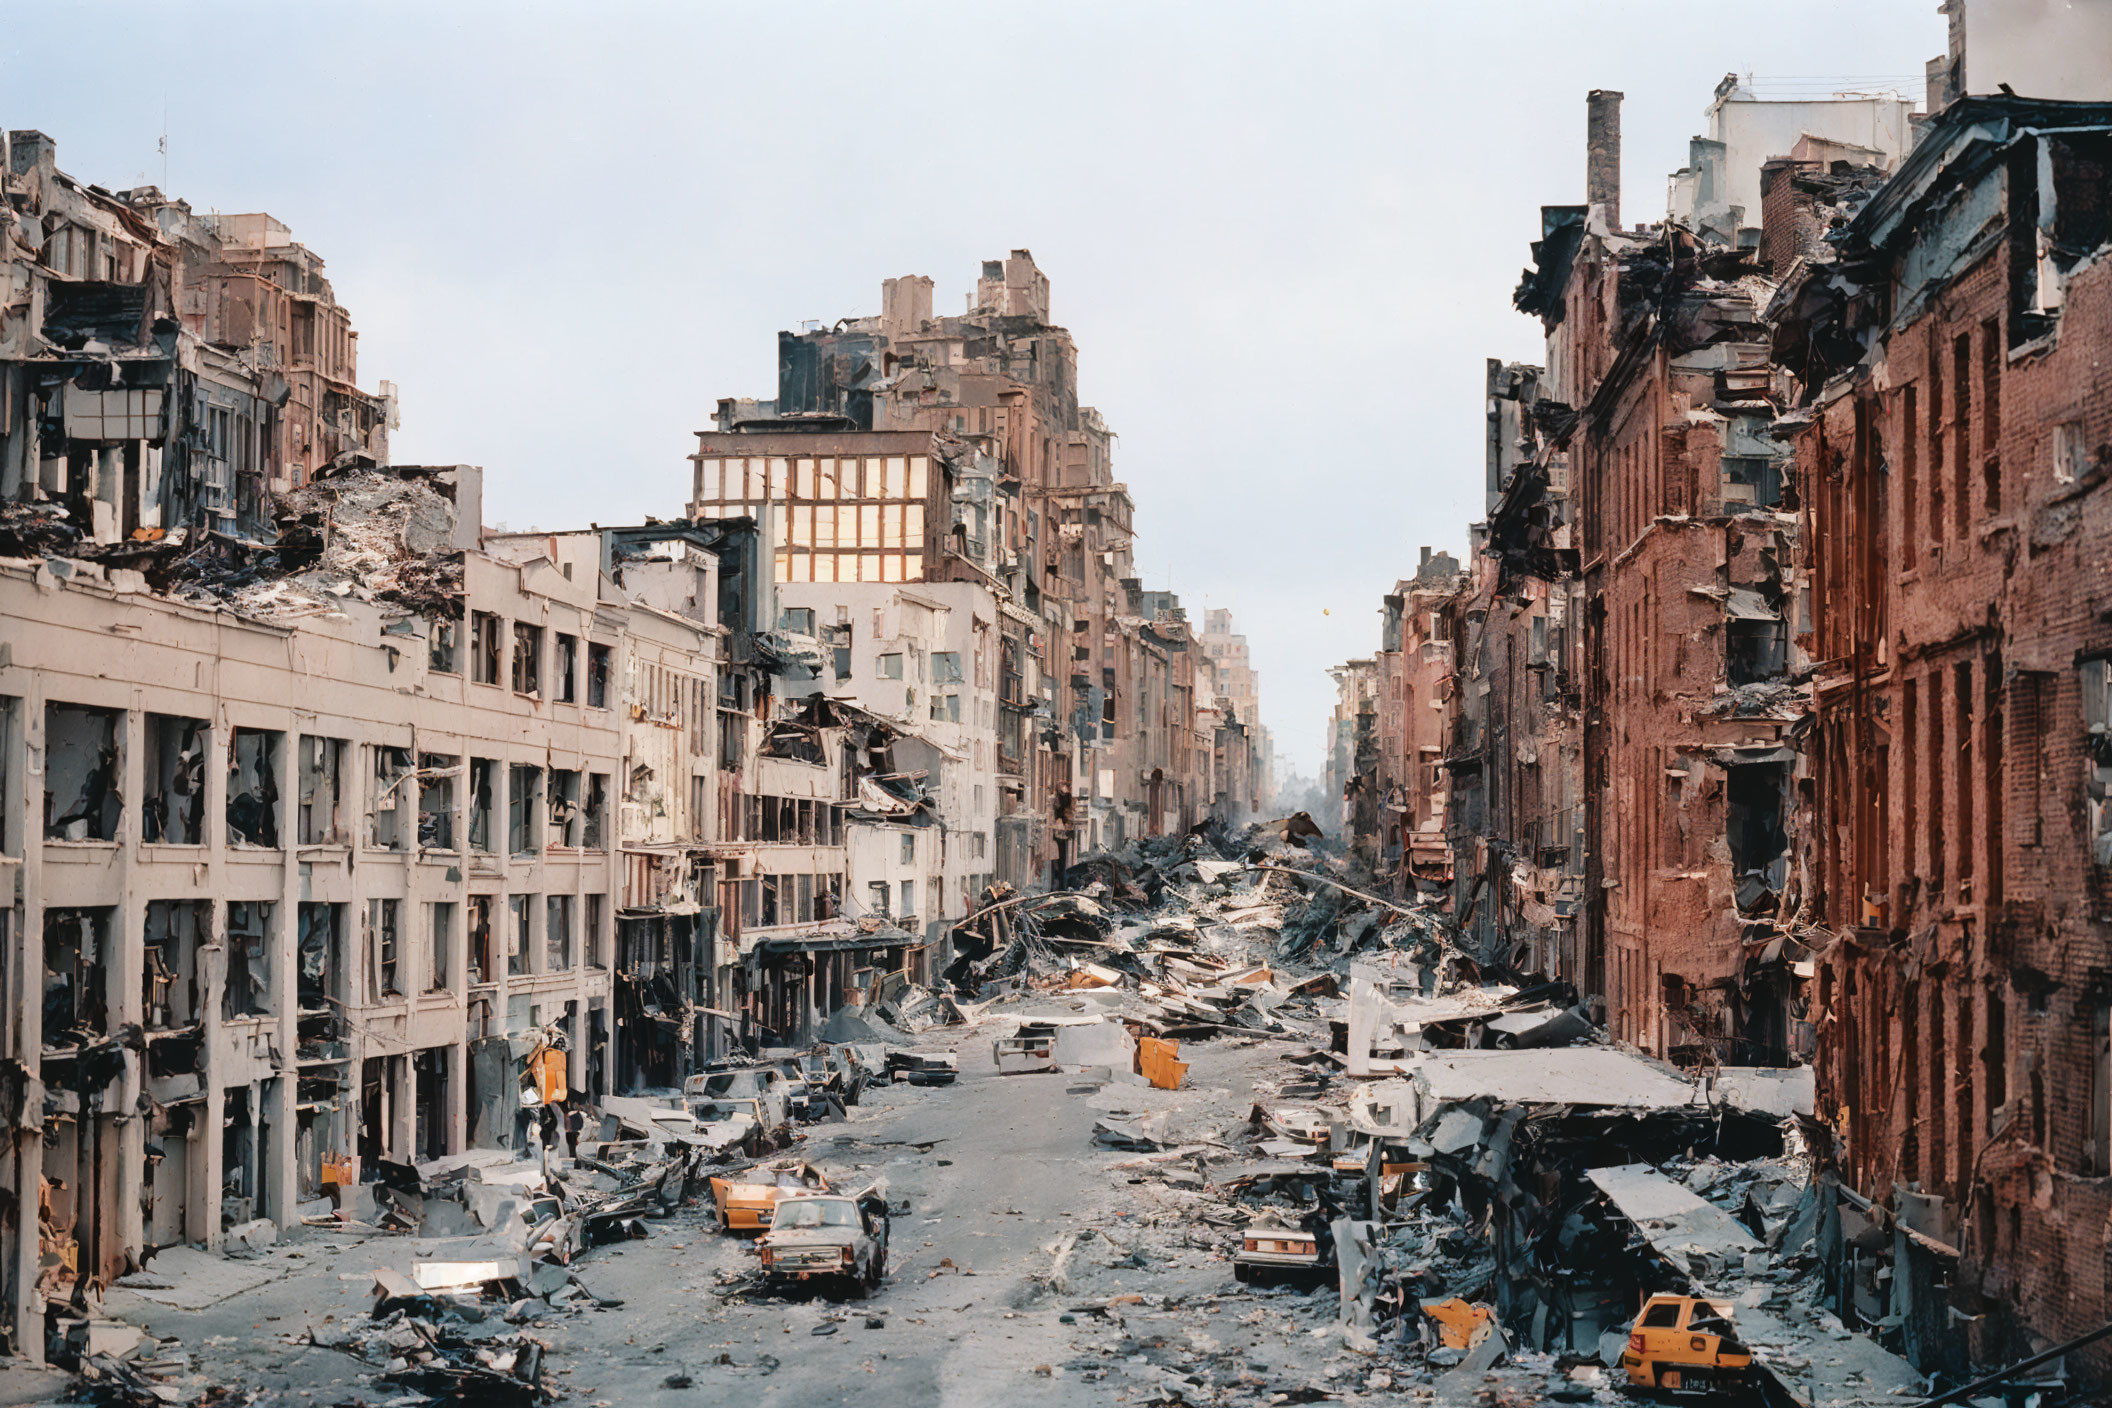 Destroyed urban street with damaged buildings and debris after catastrophe